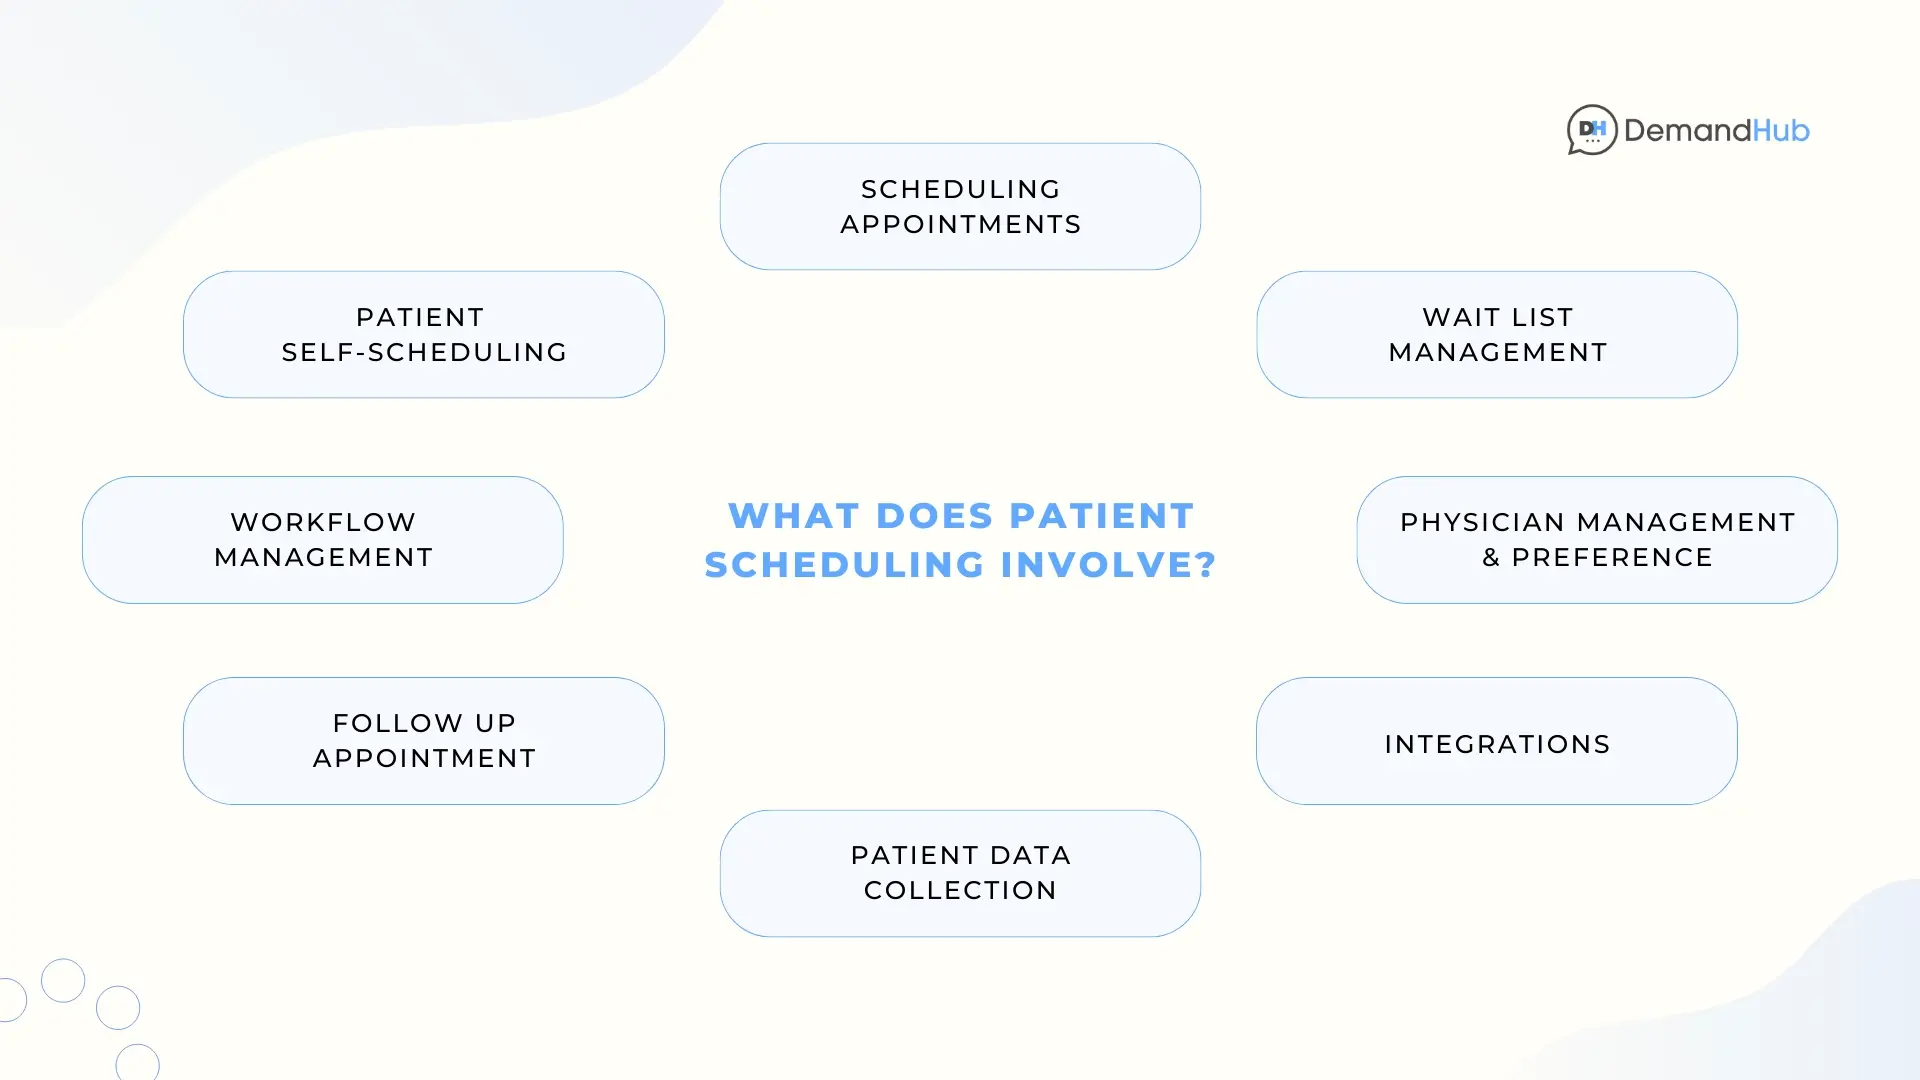 What Does Patient Scheduling Involve?